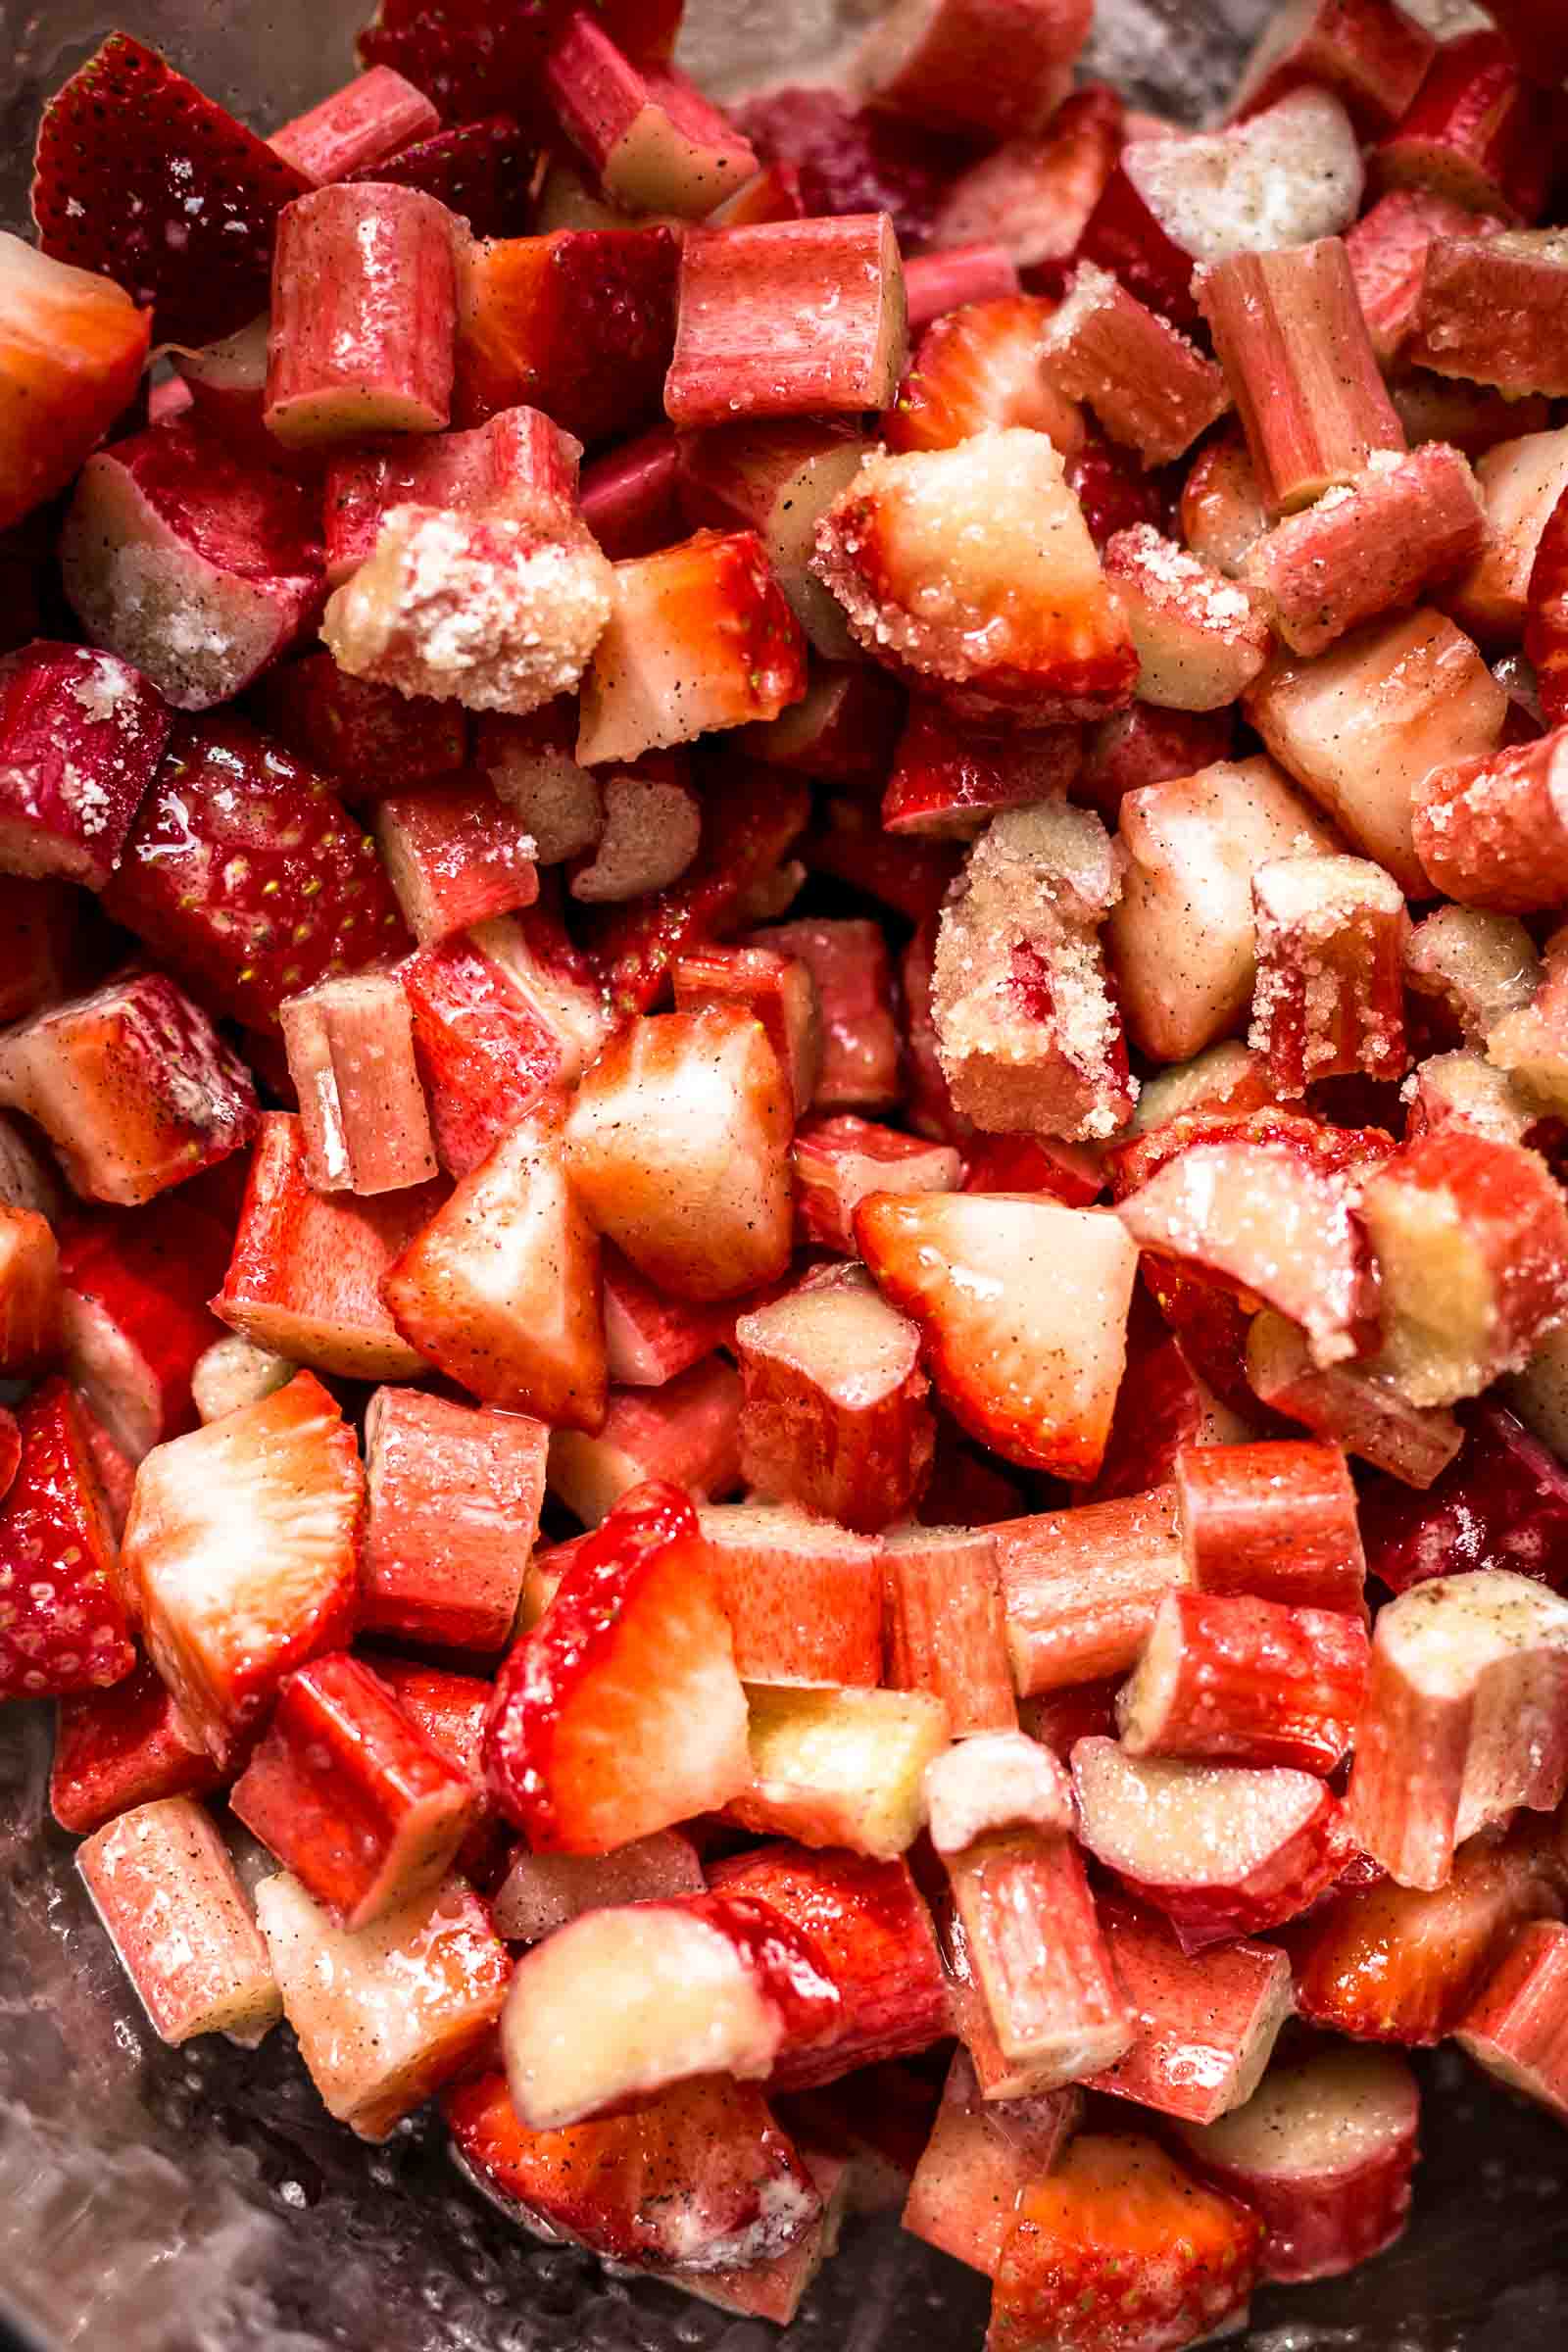 chopped strawberries and rhubarb covered in sugar in a mixing bowl